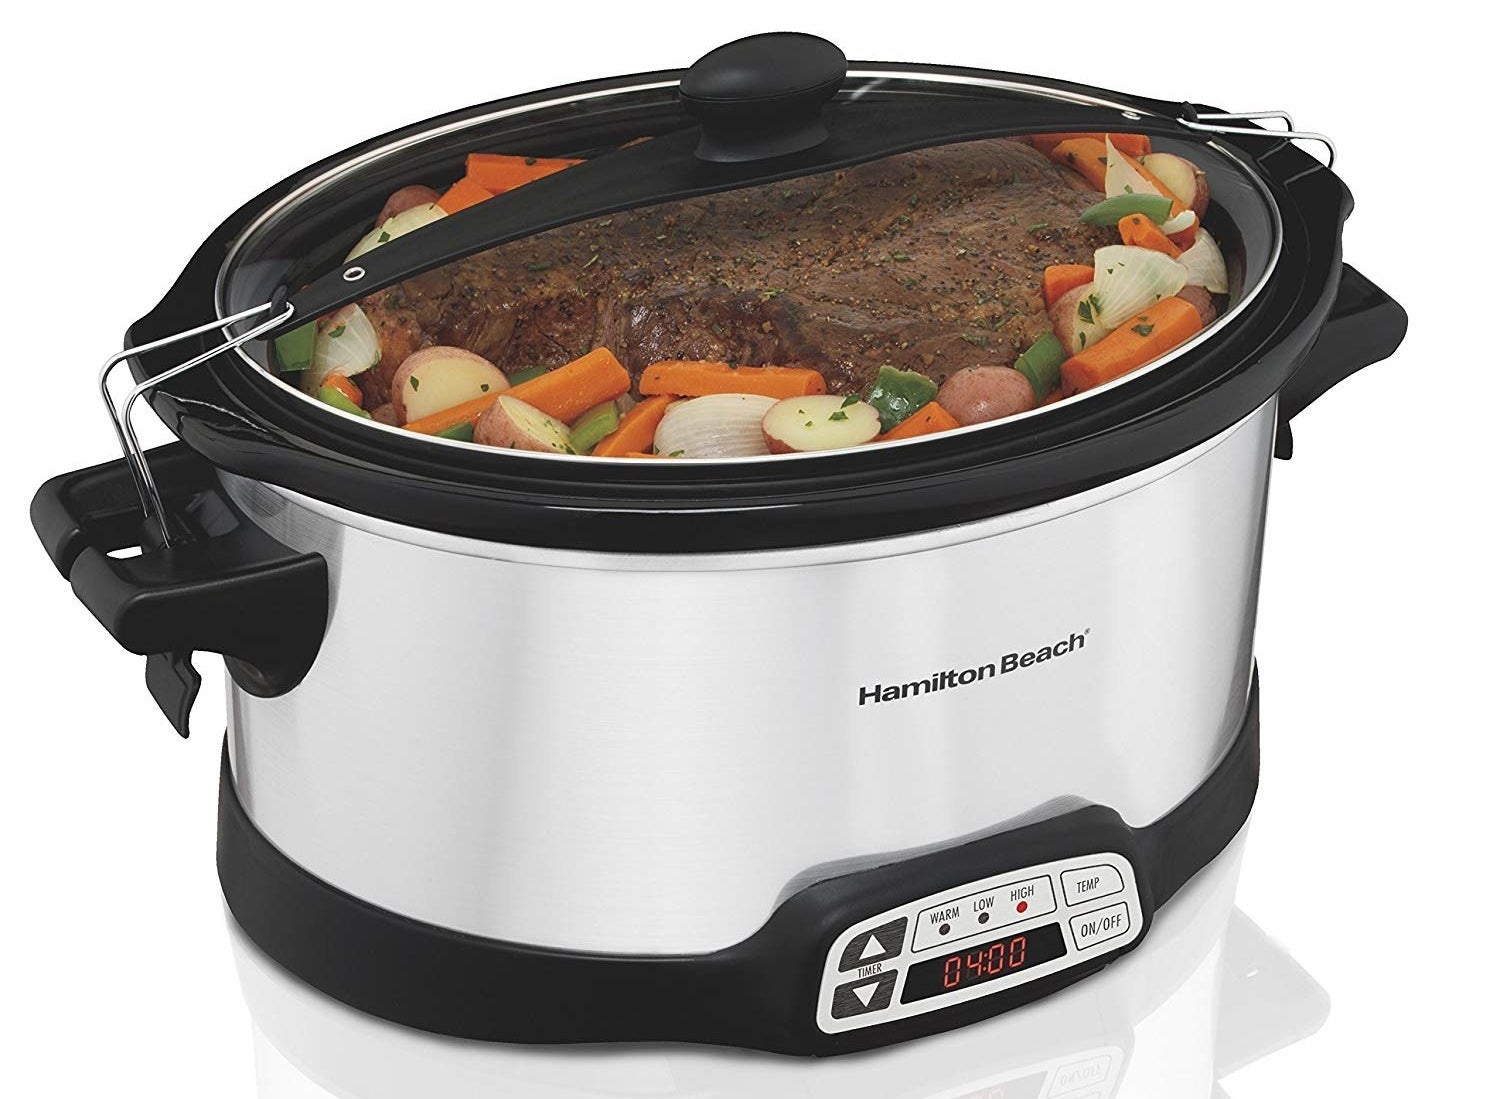 The oval stainless steel slow cooker with a front control panel